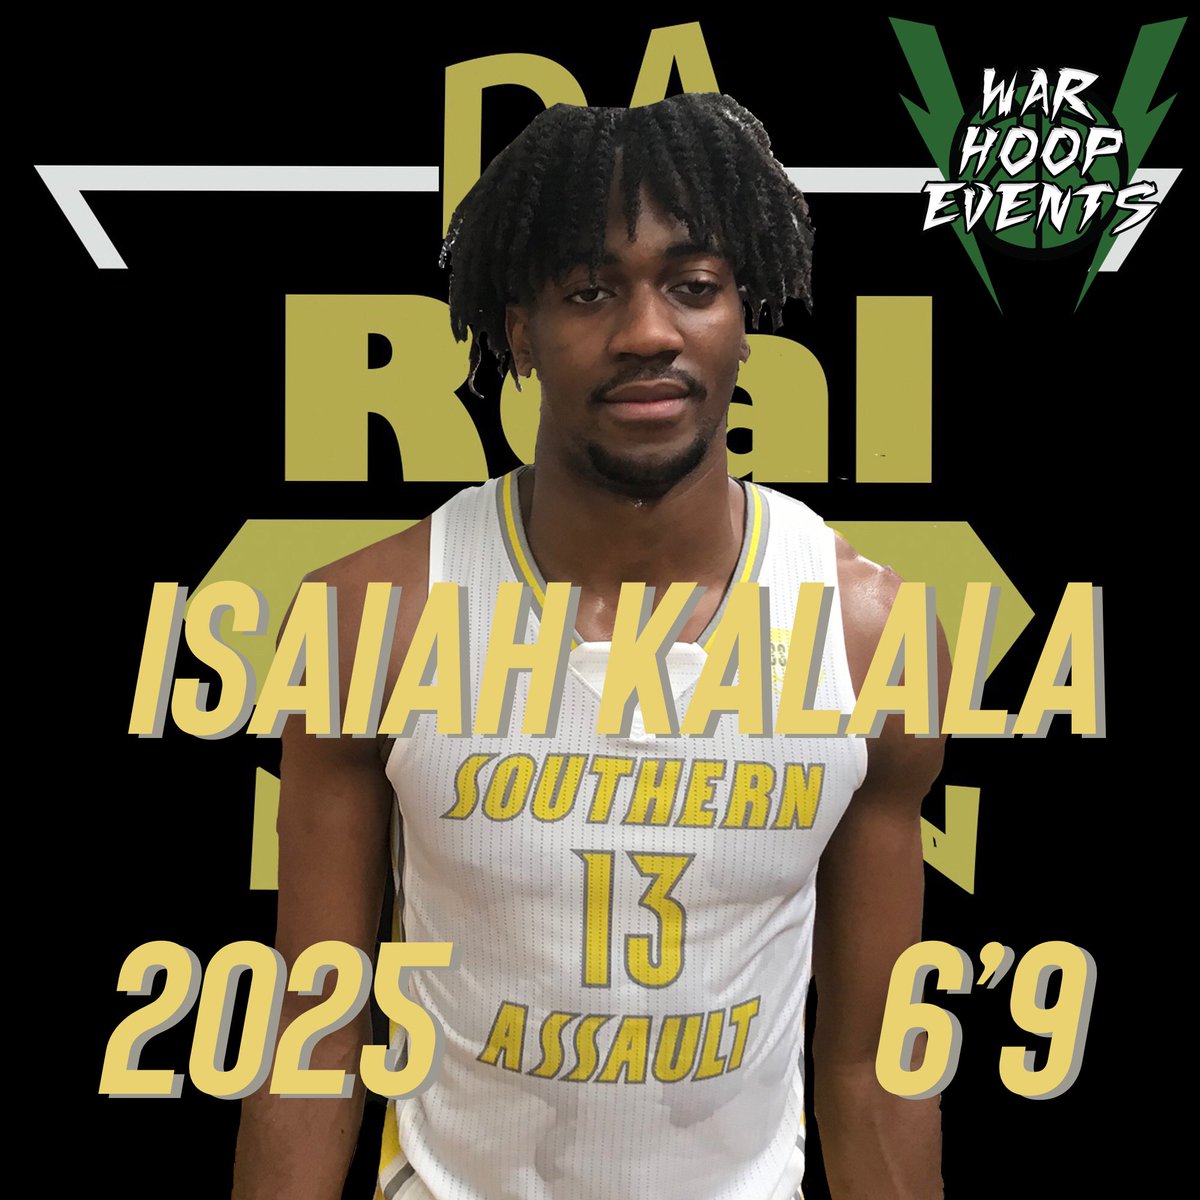 @Warb4storm 2024 recap: @AssaultSouthern 2025 is loaded, but forward @IsaiahKalala played outstanding, his college ready frame was a problem; tough bucket getter, owned the glass, opponents had issues scoring on him.. stay tuned #DaREALtalkNation